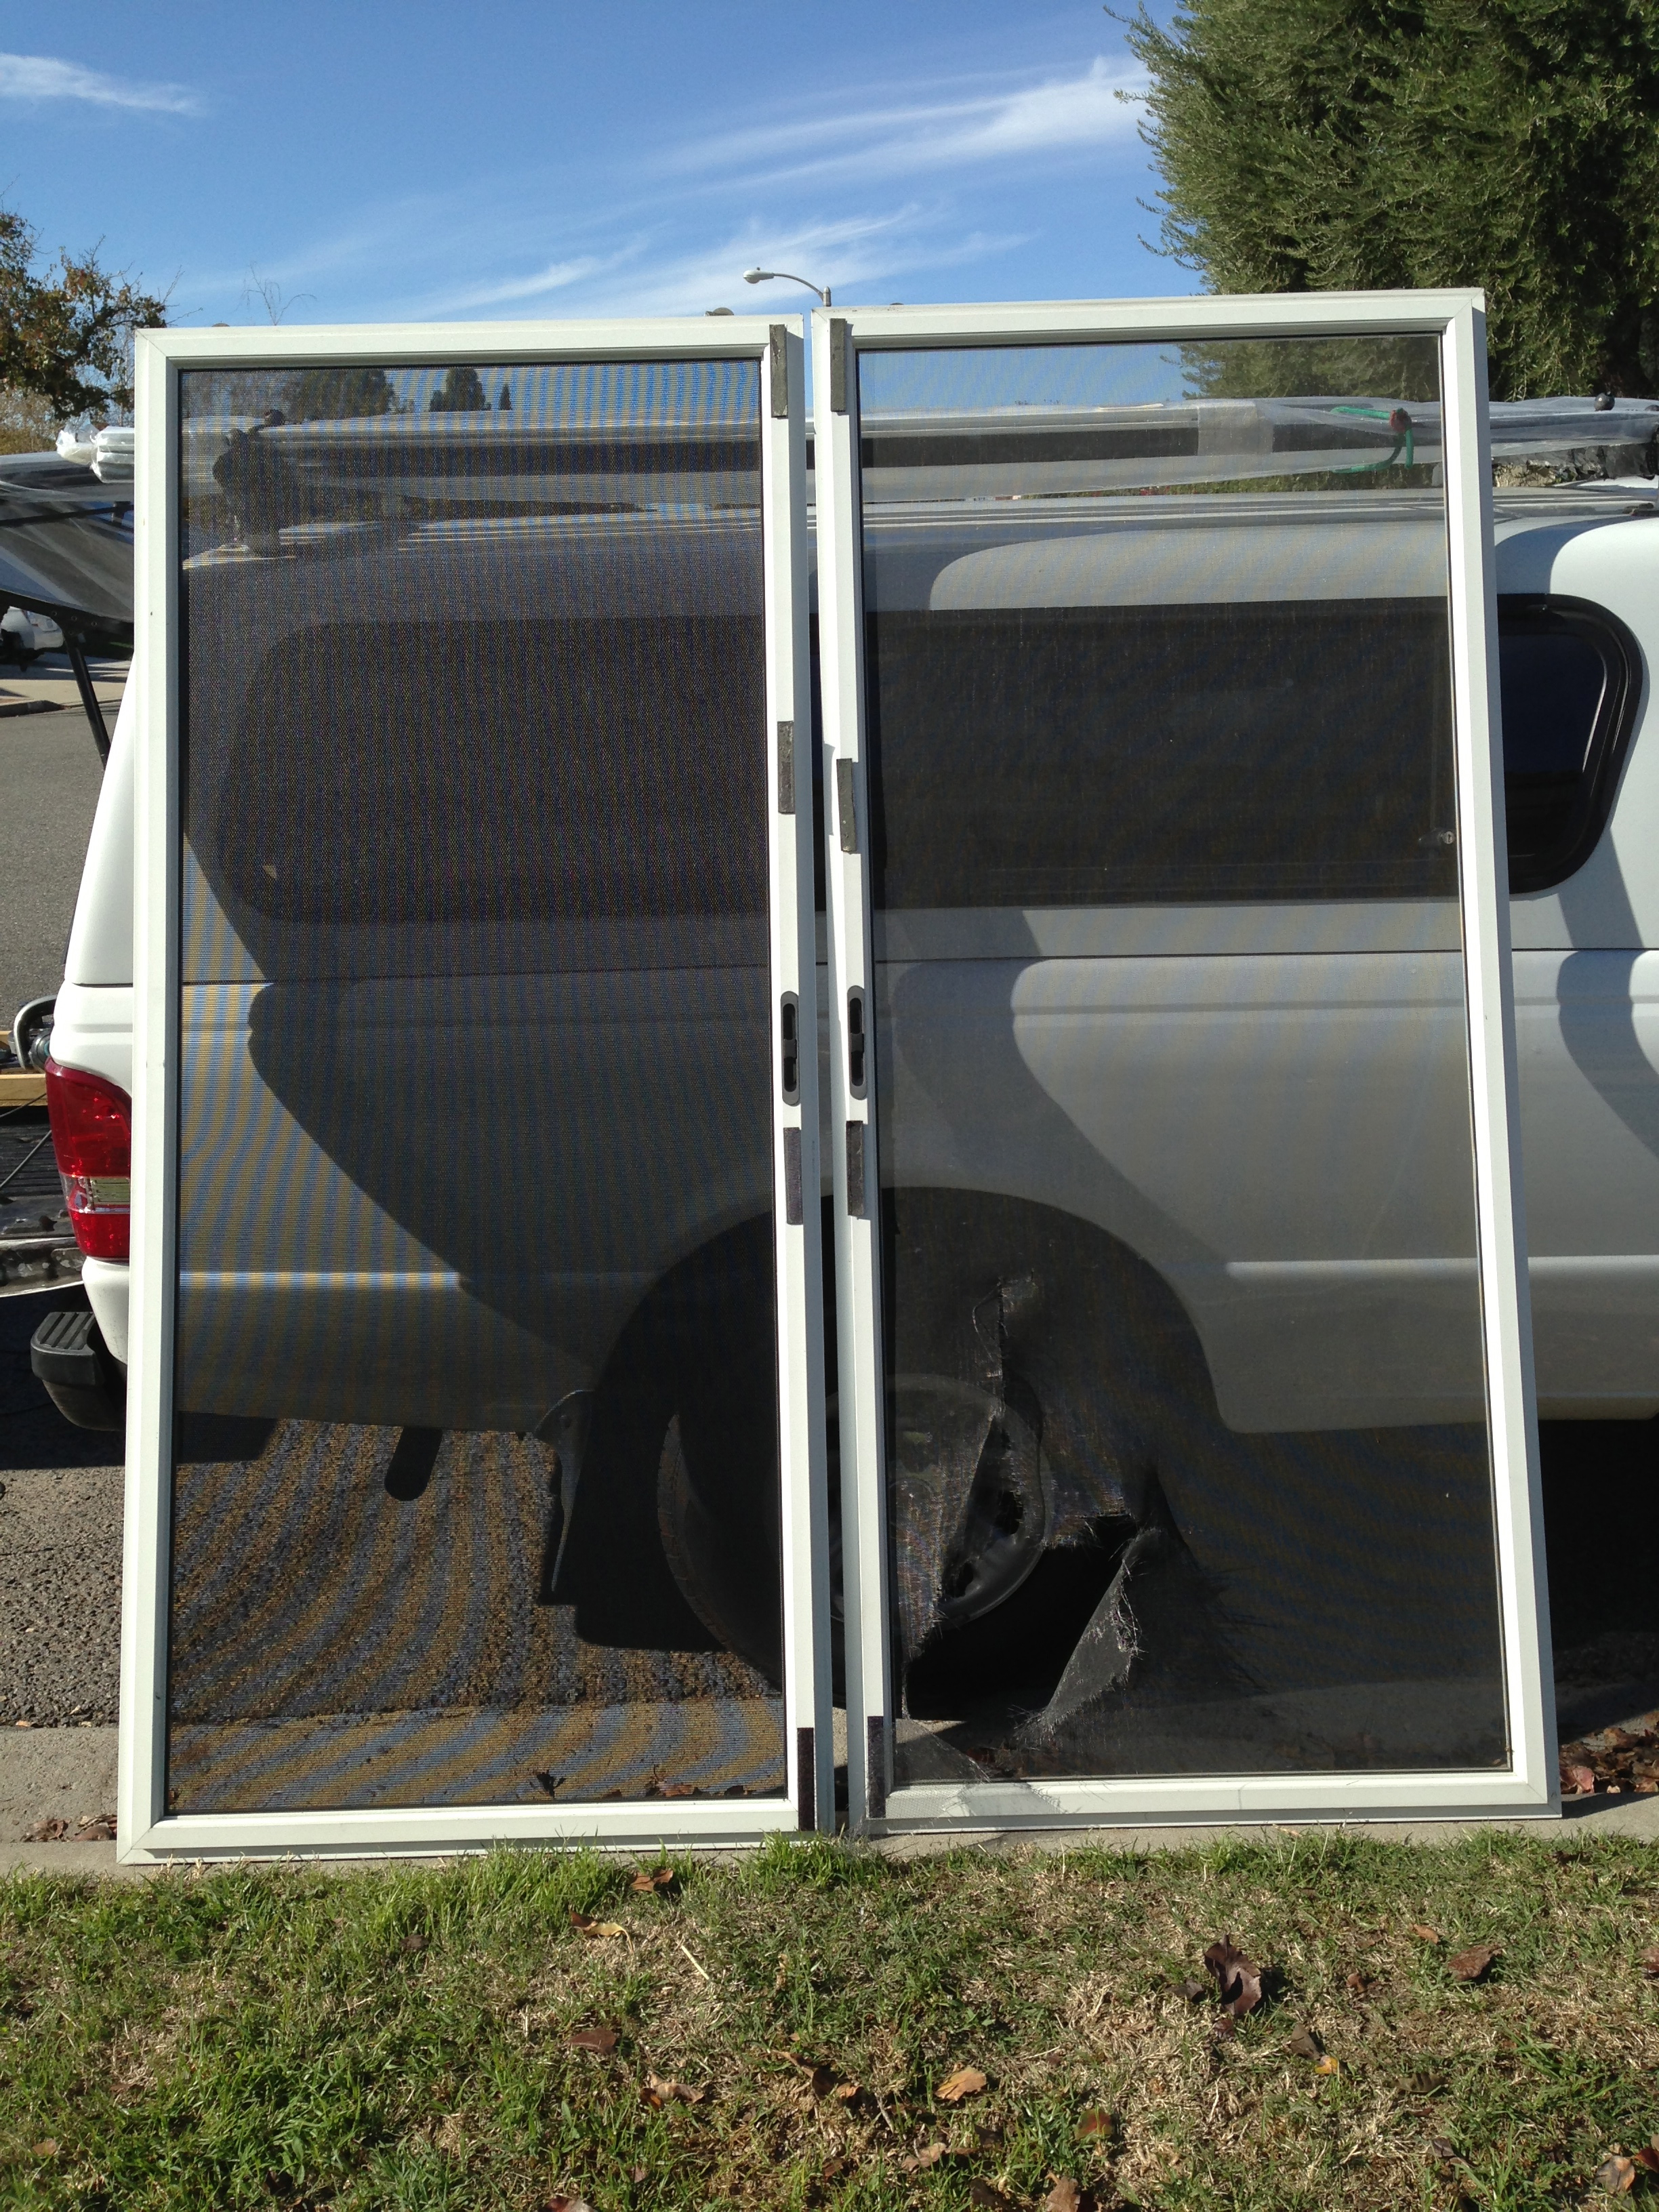 Simi Valley Screen Doors Rescreened With New Heavy Duty Phifer Pet intended for dimensions 2448 X 3264